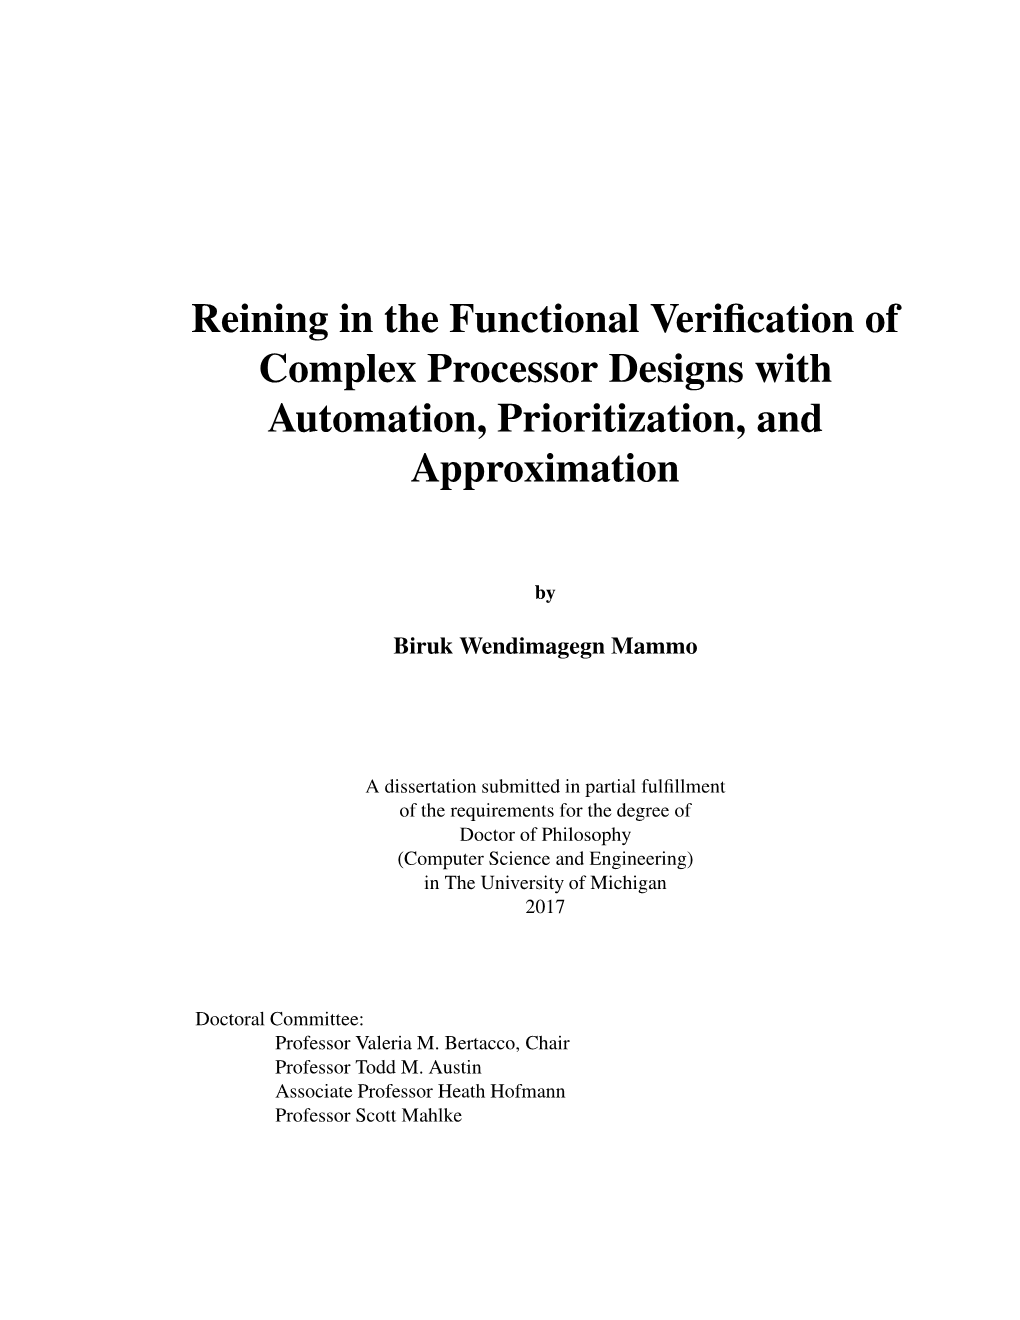 Reining in the Functional Verification of Complex Processor Designs with Automation, Prioritization, and Approximation